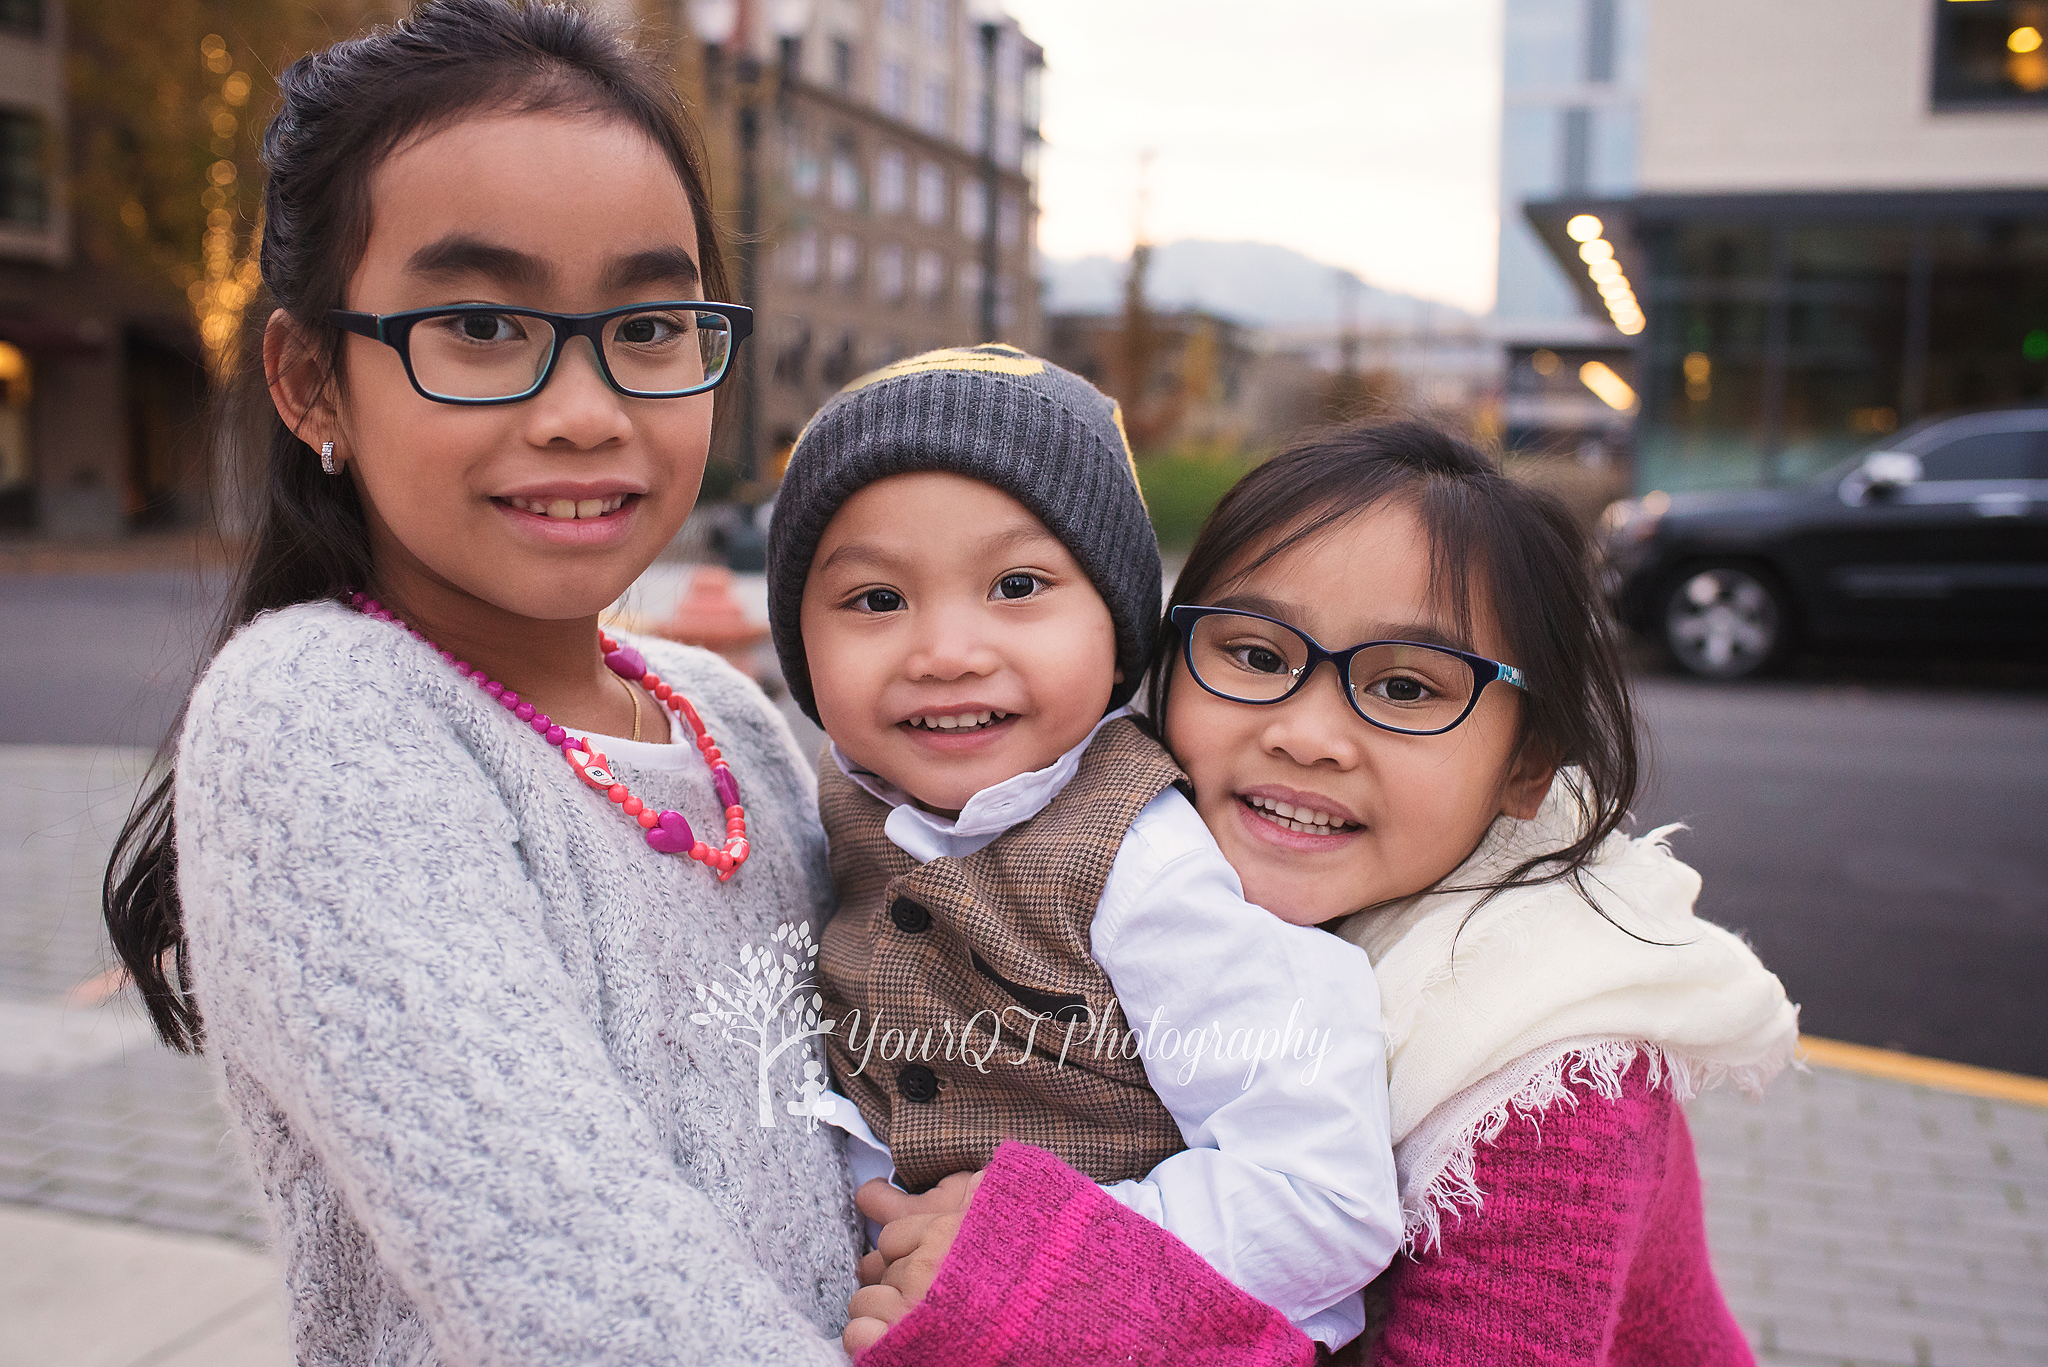 Truong Family City Session 3 kids together Downtown Portland Oregon